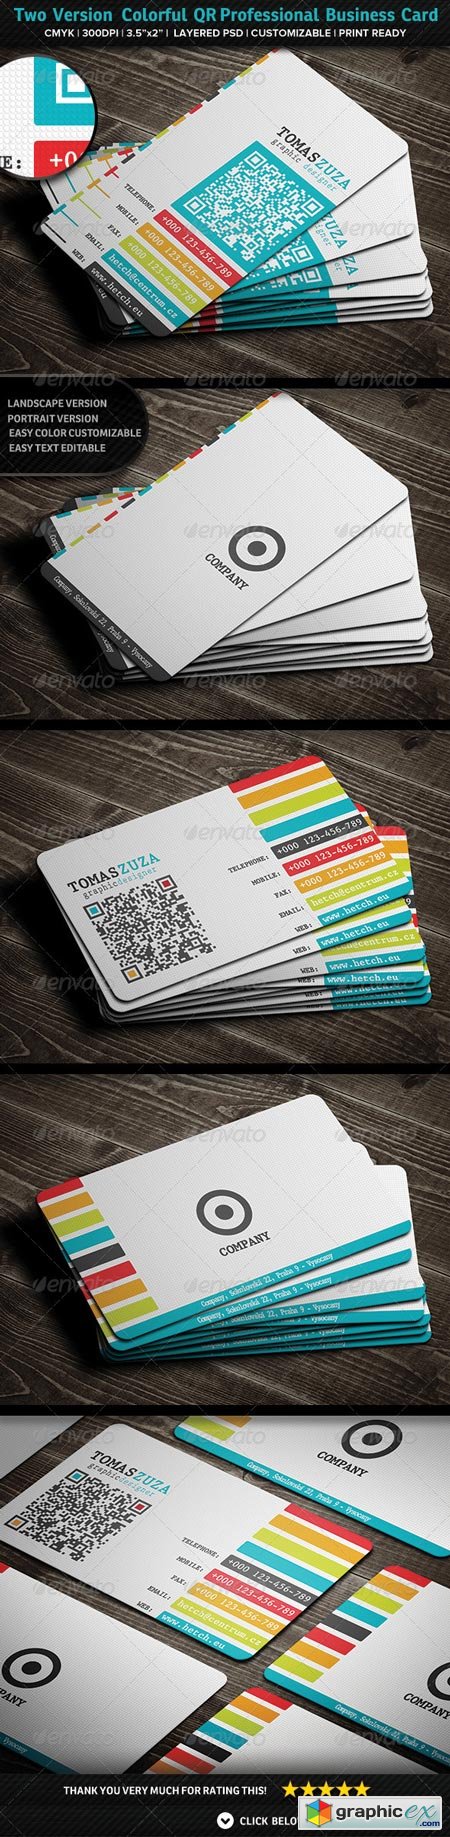 Two Version Colorful QR Professional Business 2883814